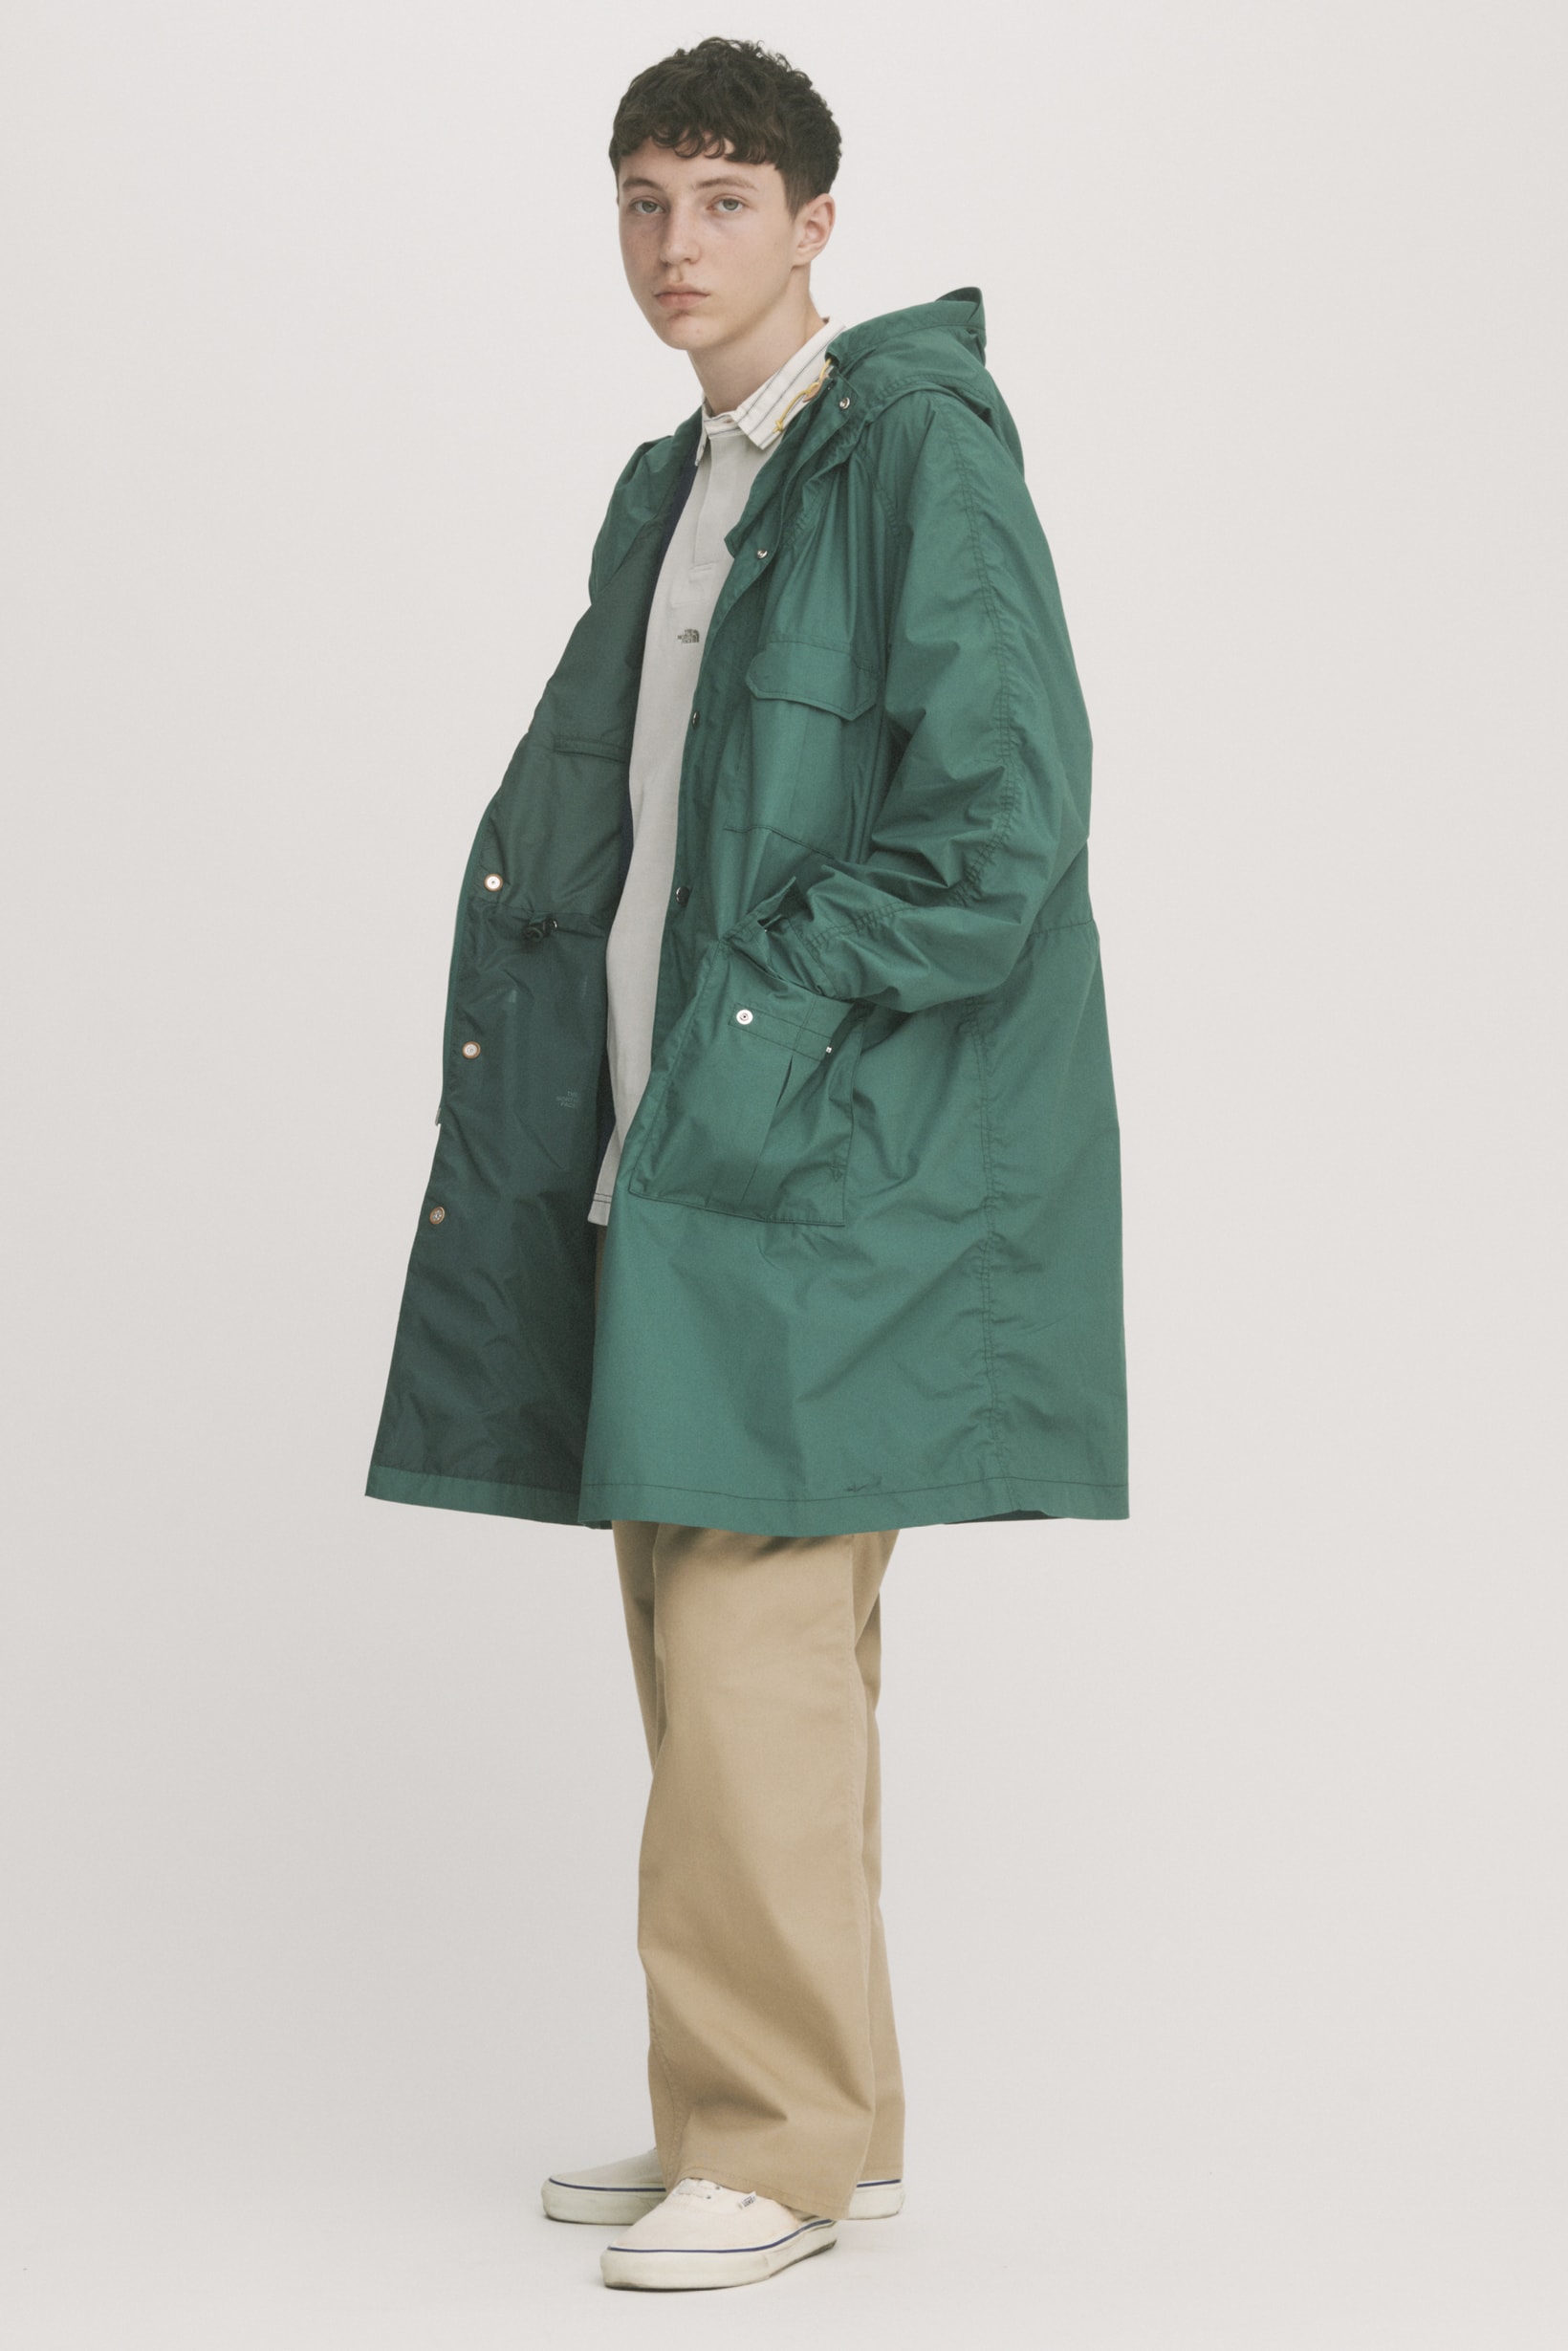 THE NORTH FACE PURPLE LABEL Spring Summer 2019 Lookbook Jacket Green Pants Tan